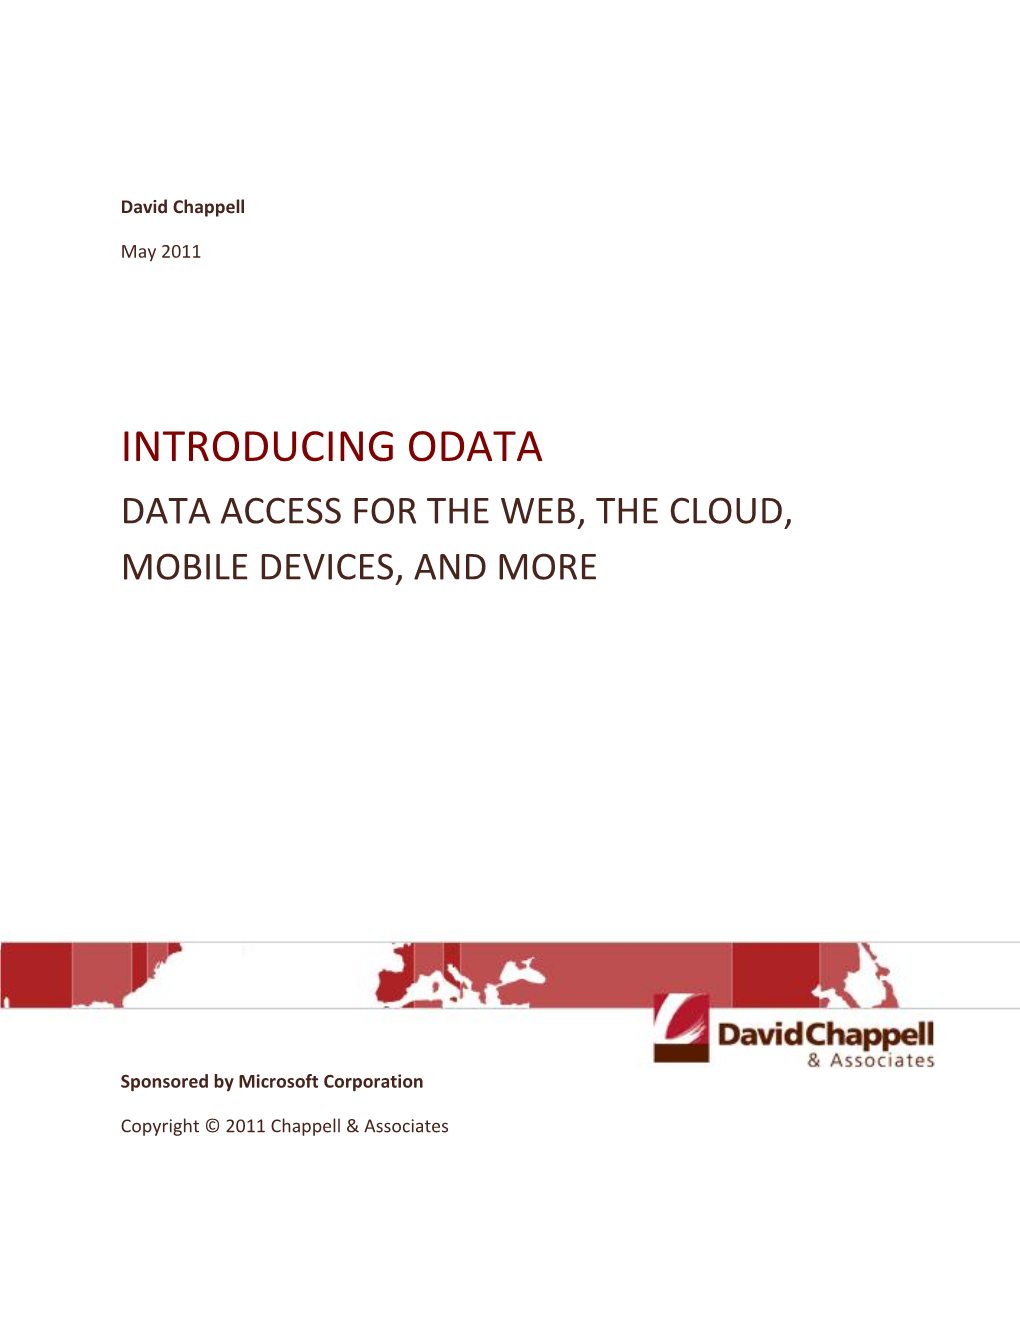 Introducing Odata Data Access for the Web, the Cloud, Mobile Devices, and More